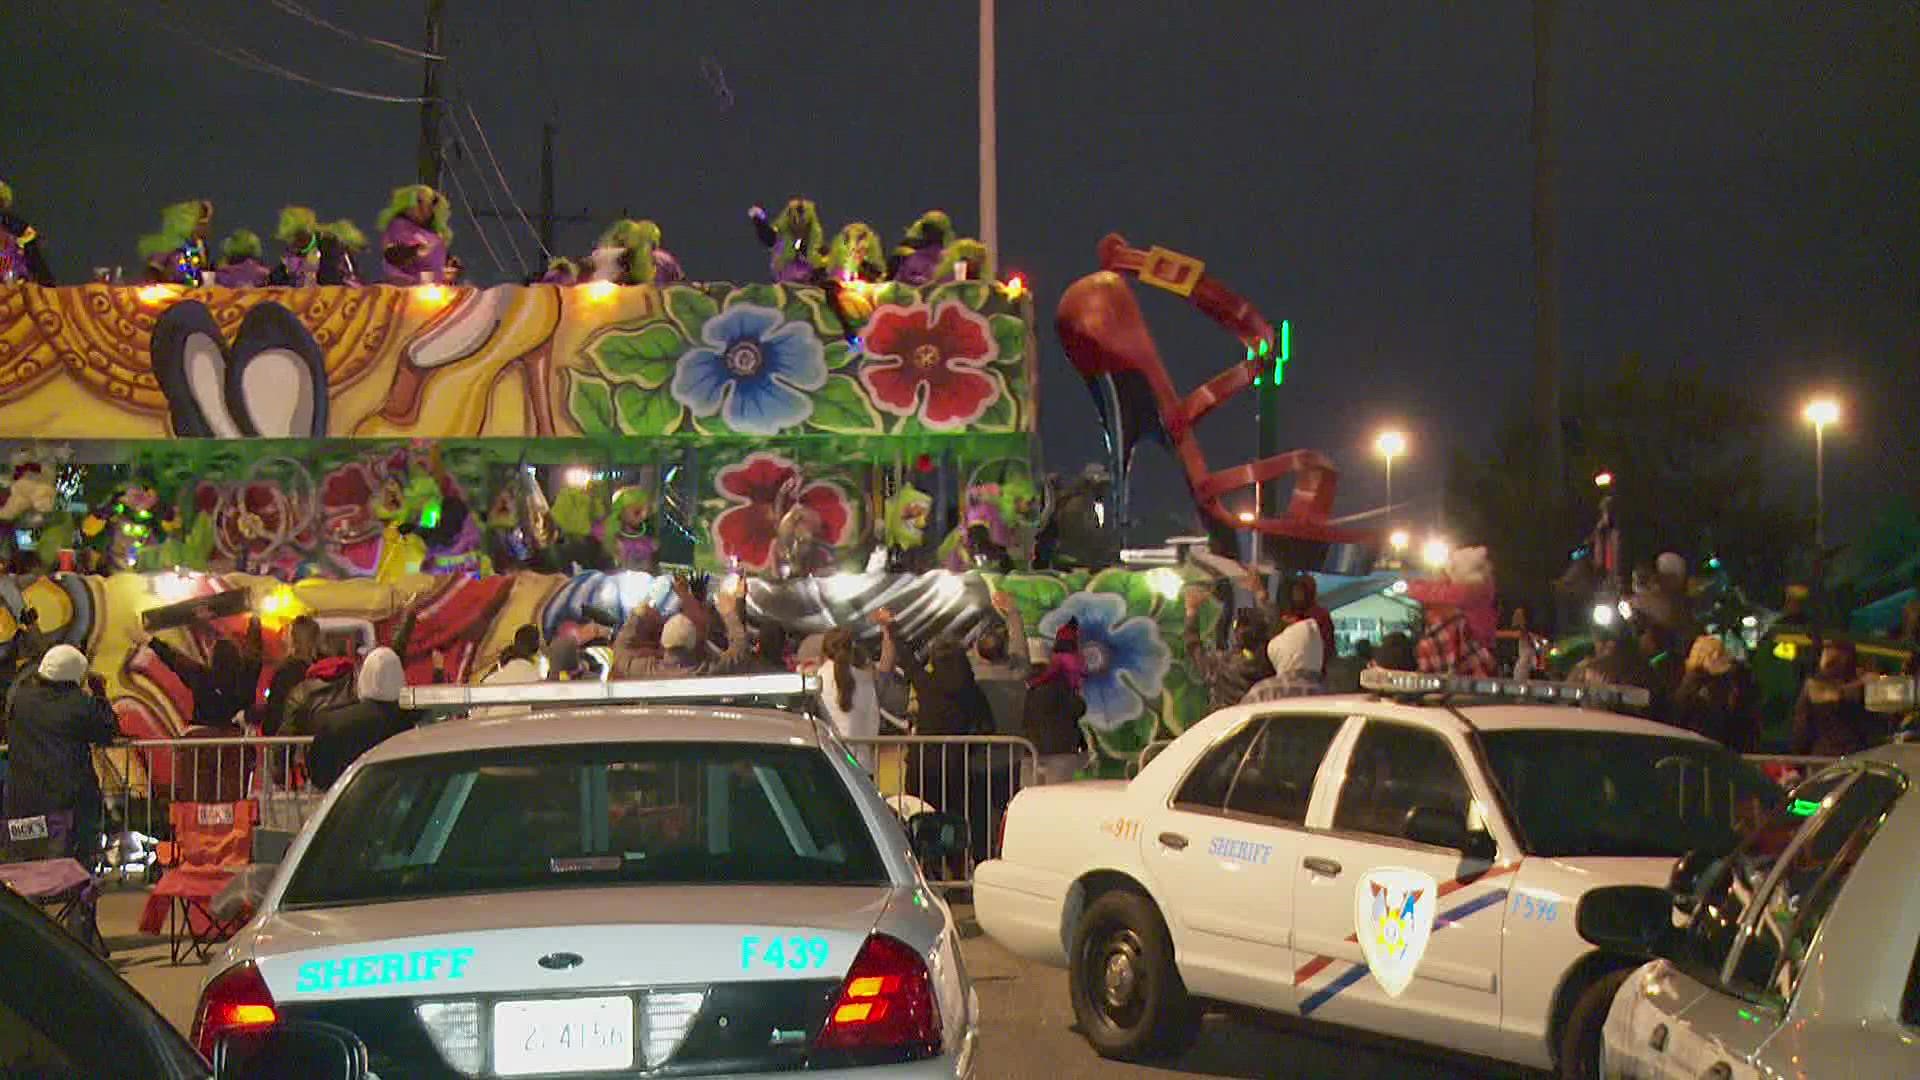 On Friday, the all-female Carnival Krewe of Athena will announce its Grand Marshal for 2022.